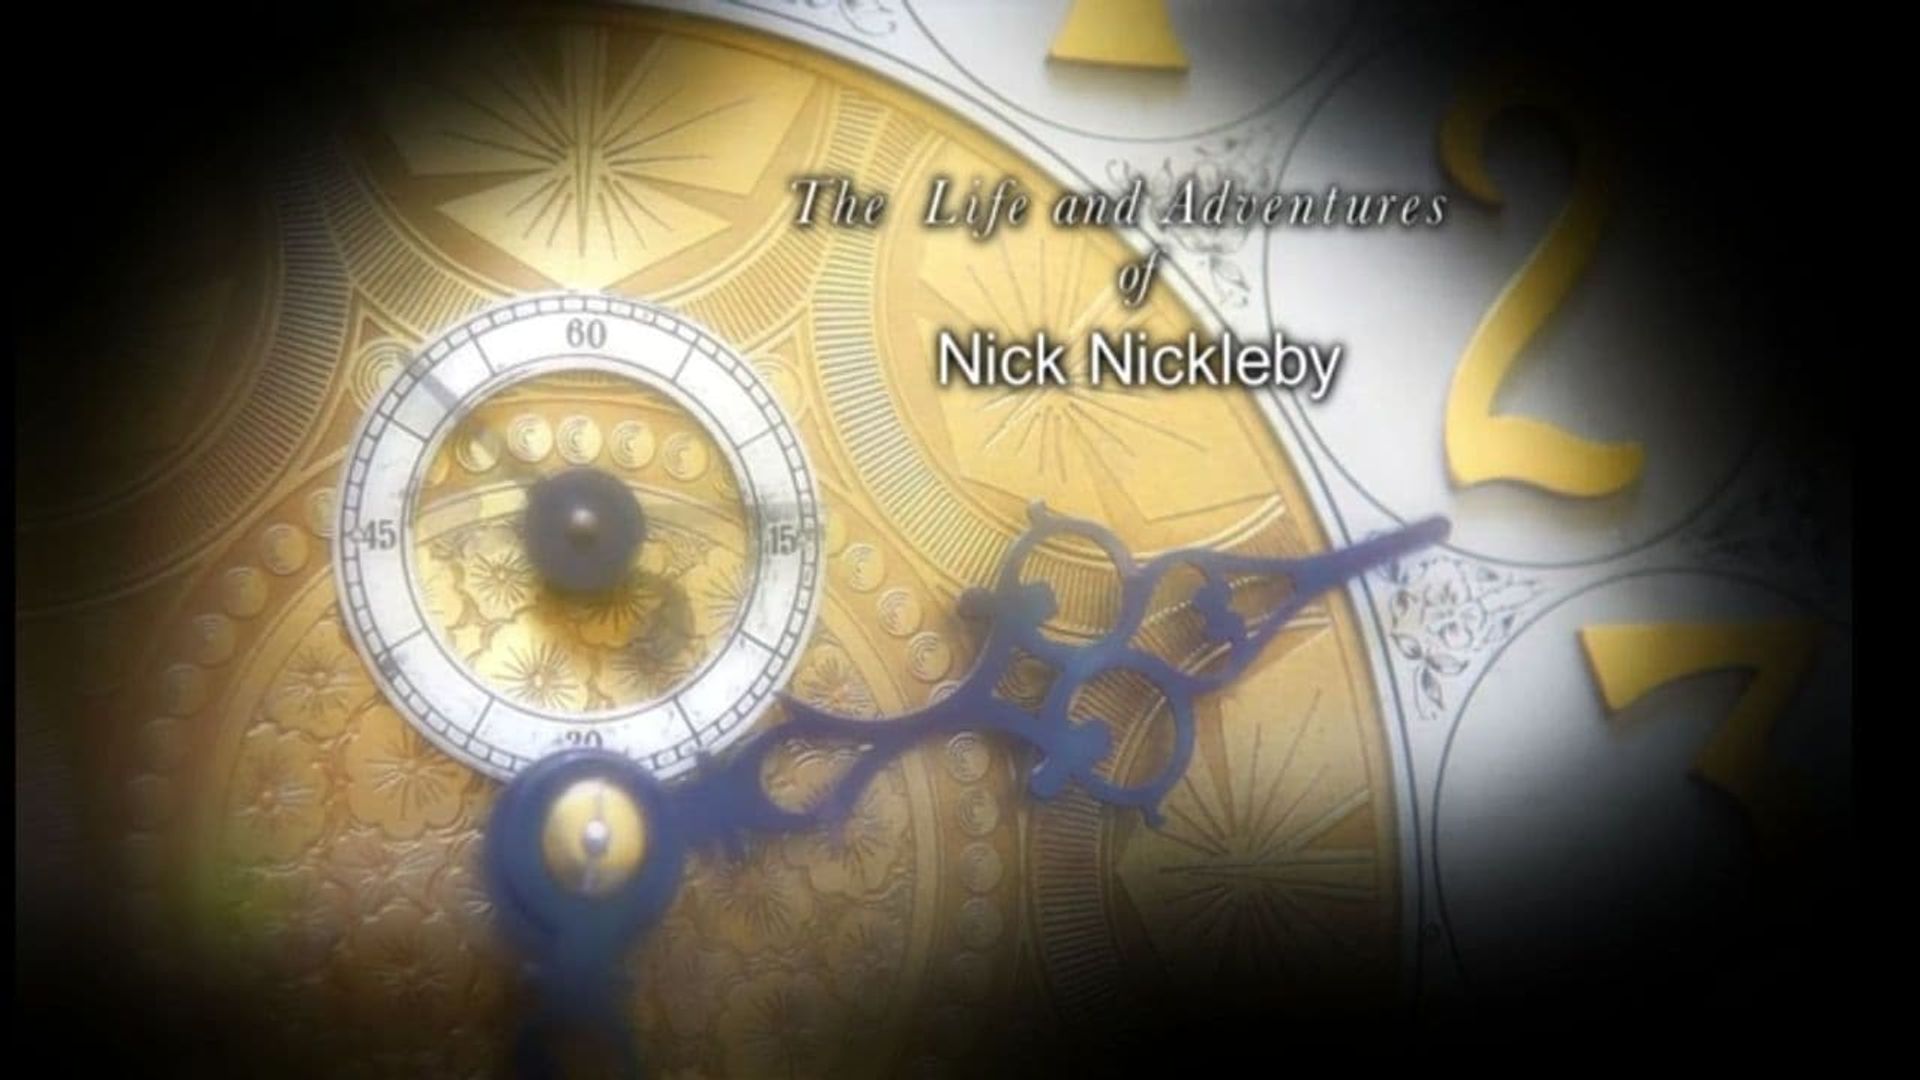 The Life and Adventures of Nick Nickleby background